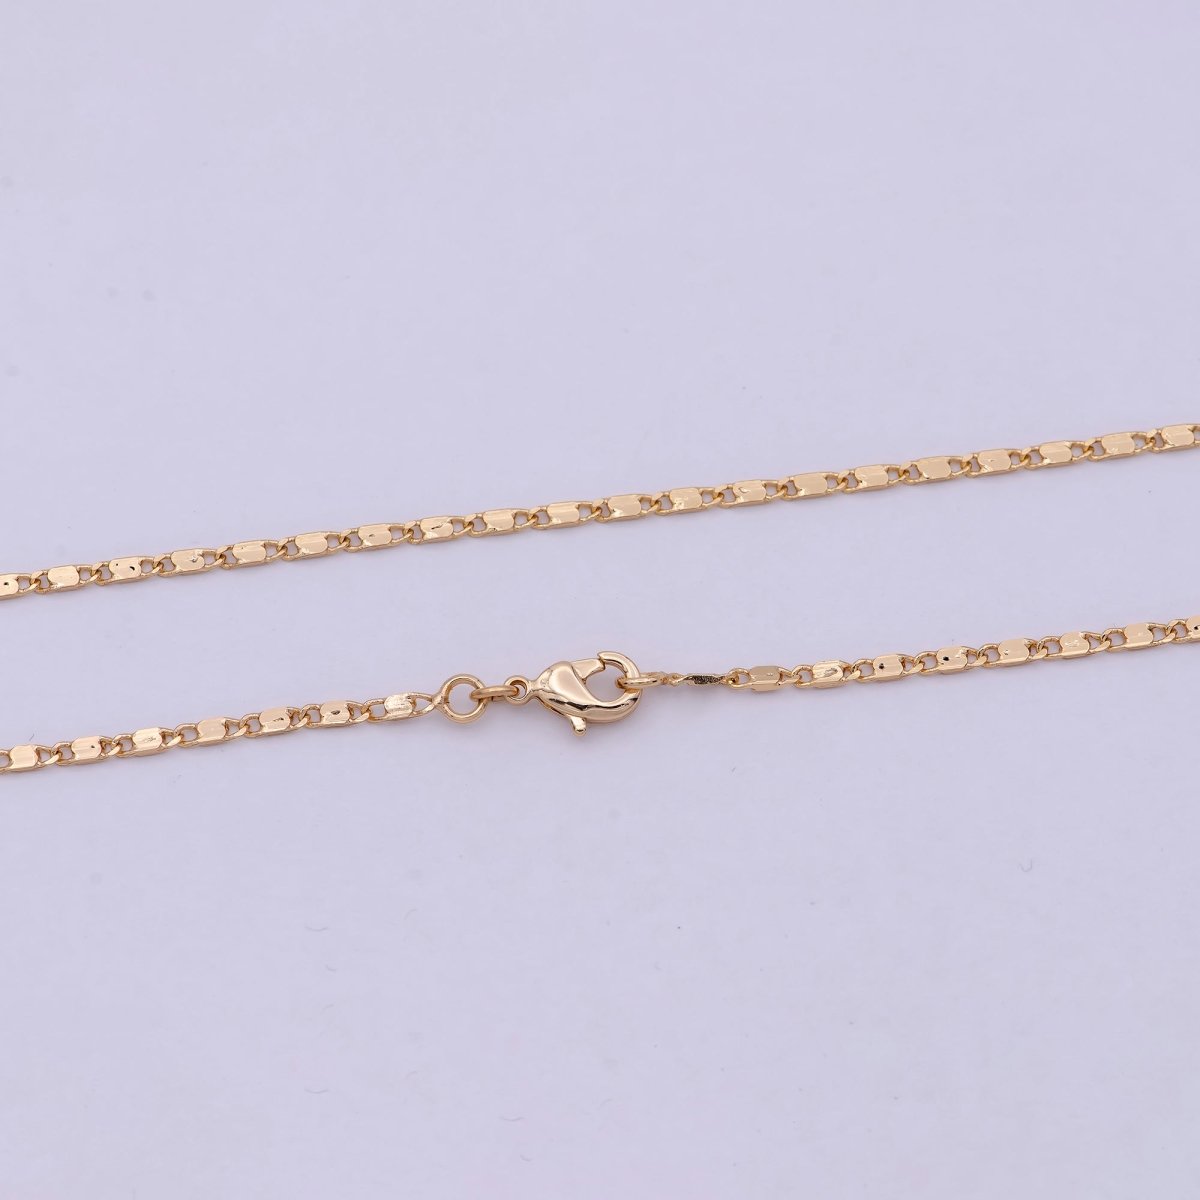 18k Gold Filled Chain Necklace, Fine Scroll Gold Chain, Simple Gold Necklace, Thin Plain Women's Necklace 18 inch long | WA-531 Clearance Pricing - DLUXCA